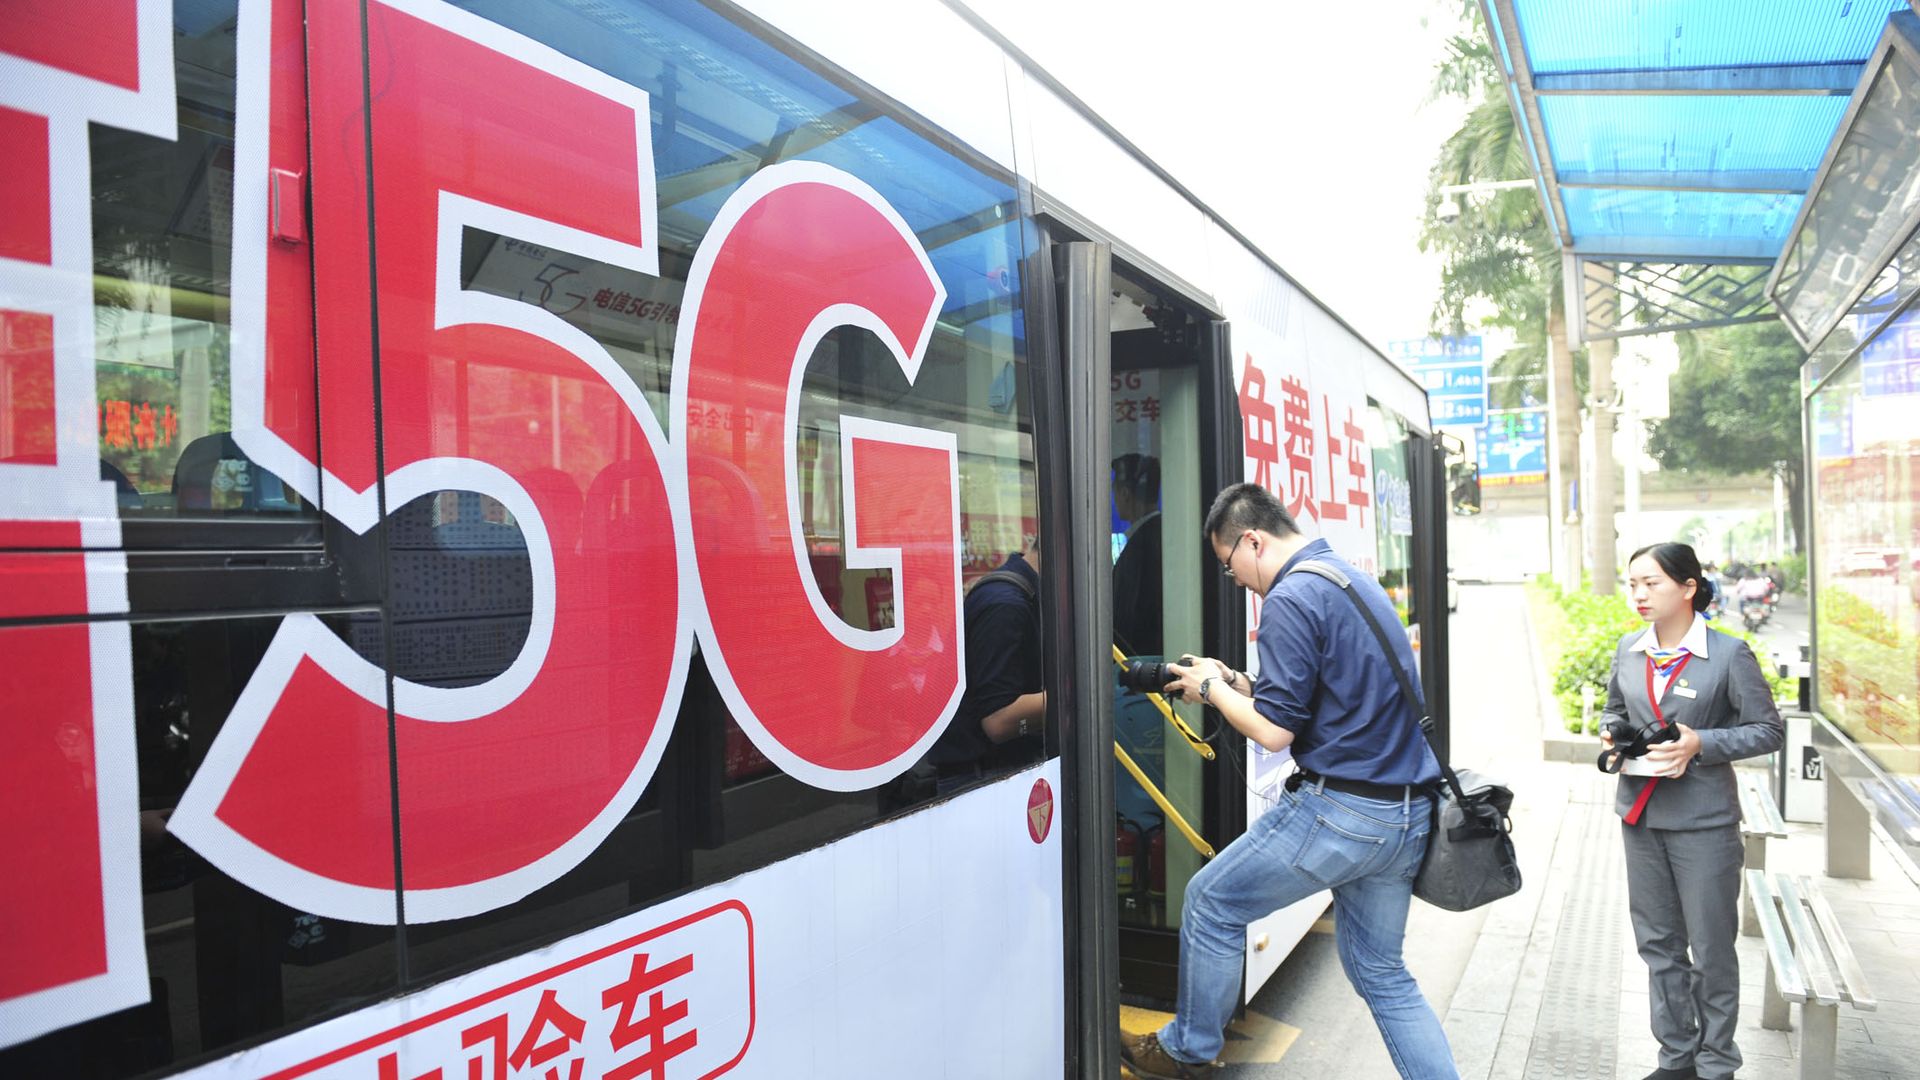 Man boards 5G equipped bus in Nanning, China